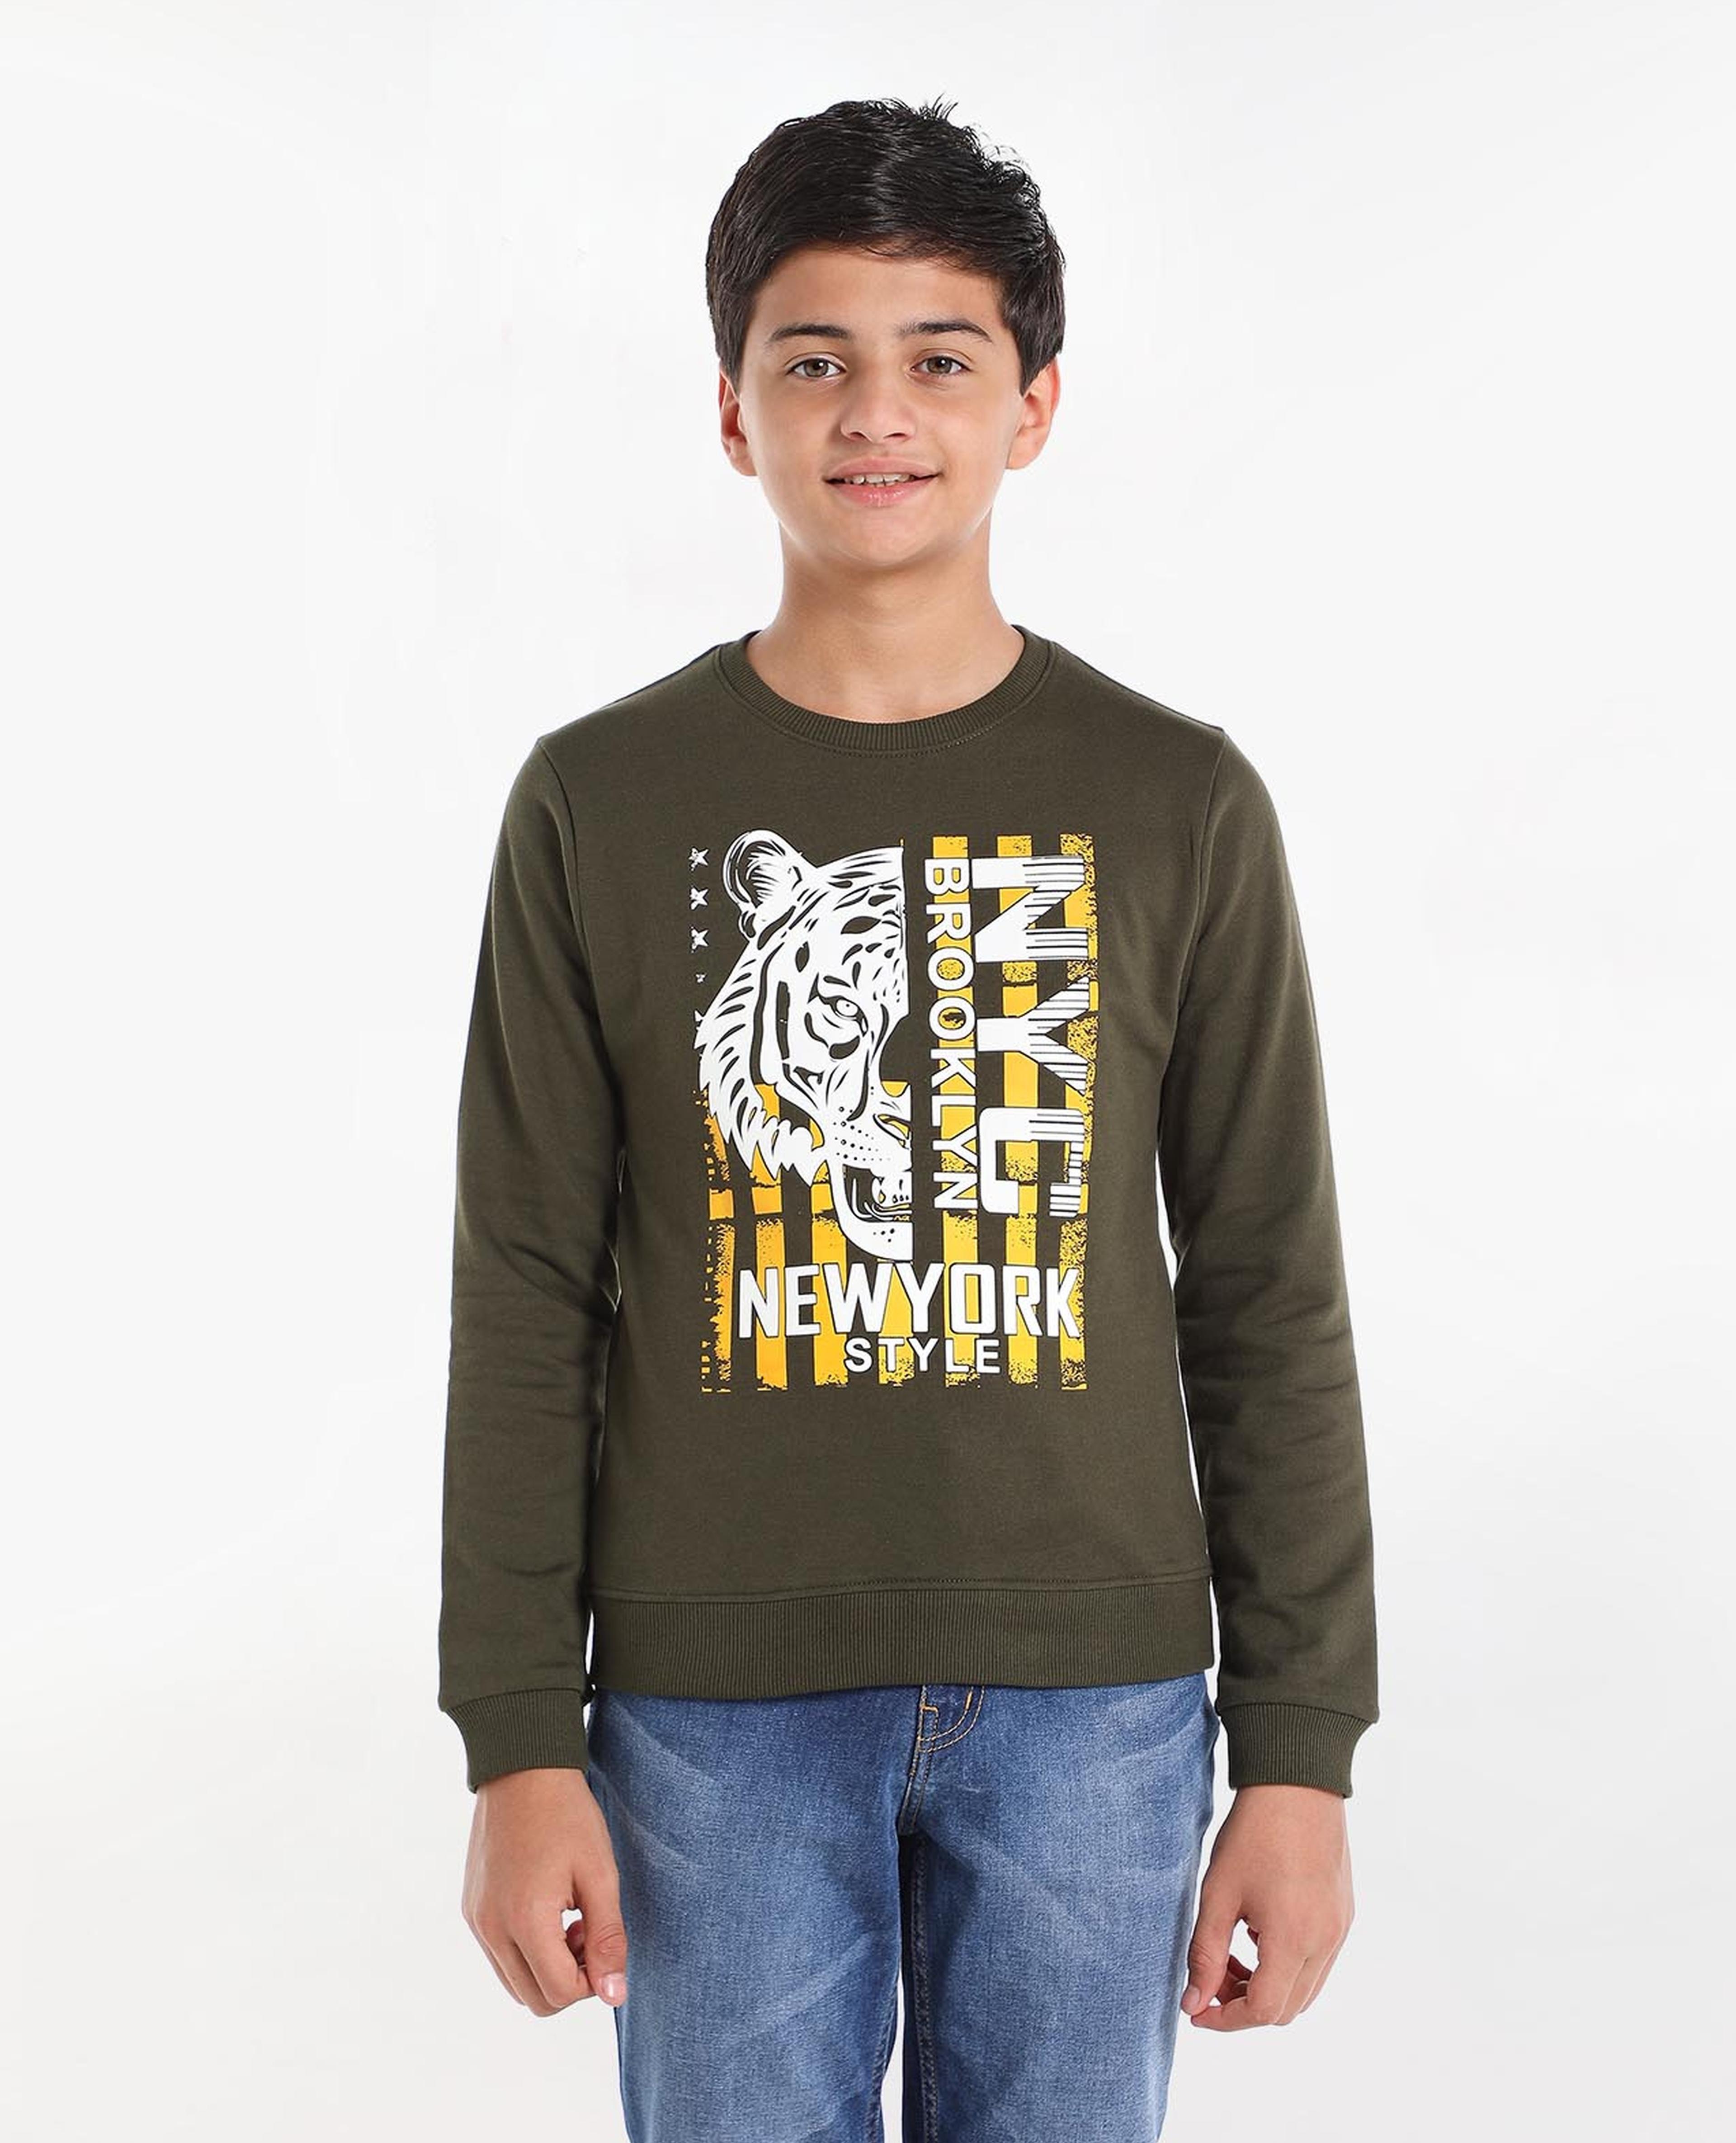 Typography Printed Sweatshirt with Crew Neck and Long Sleeves